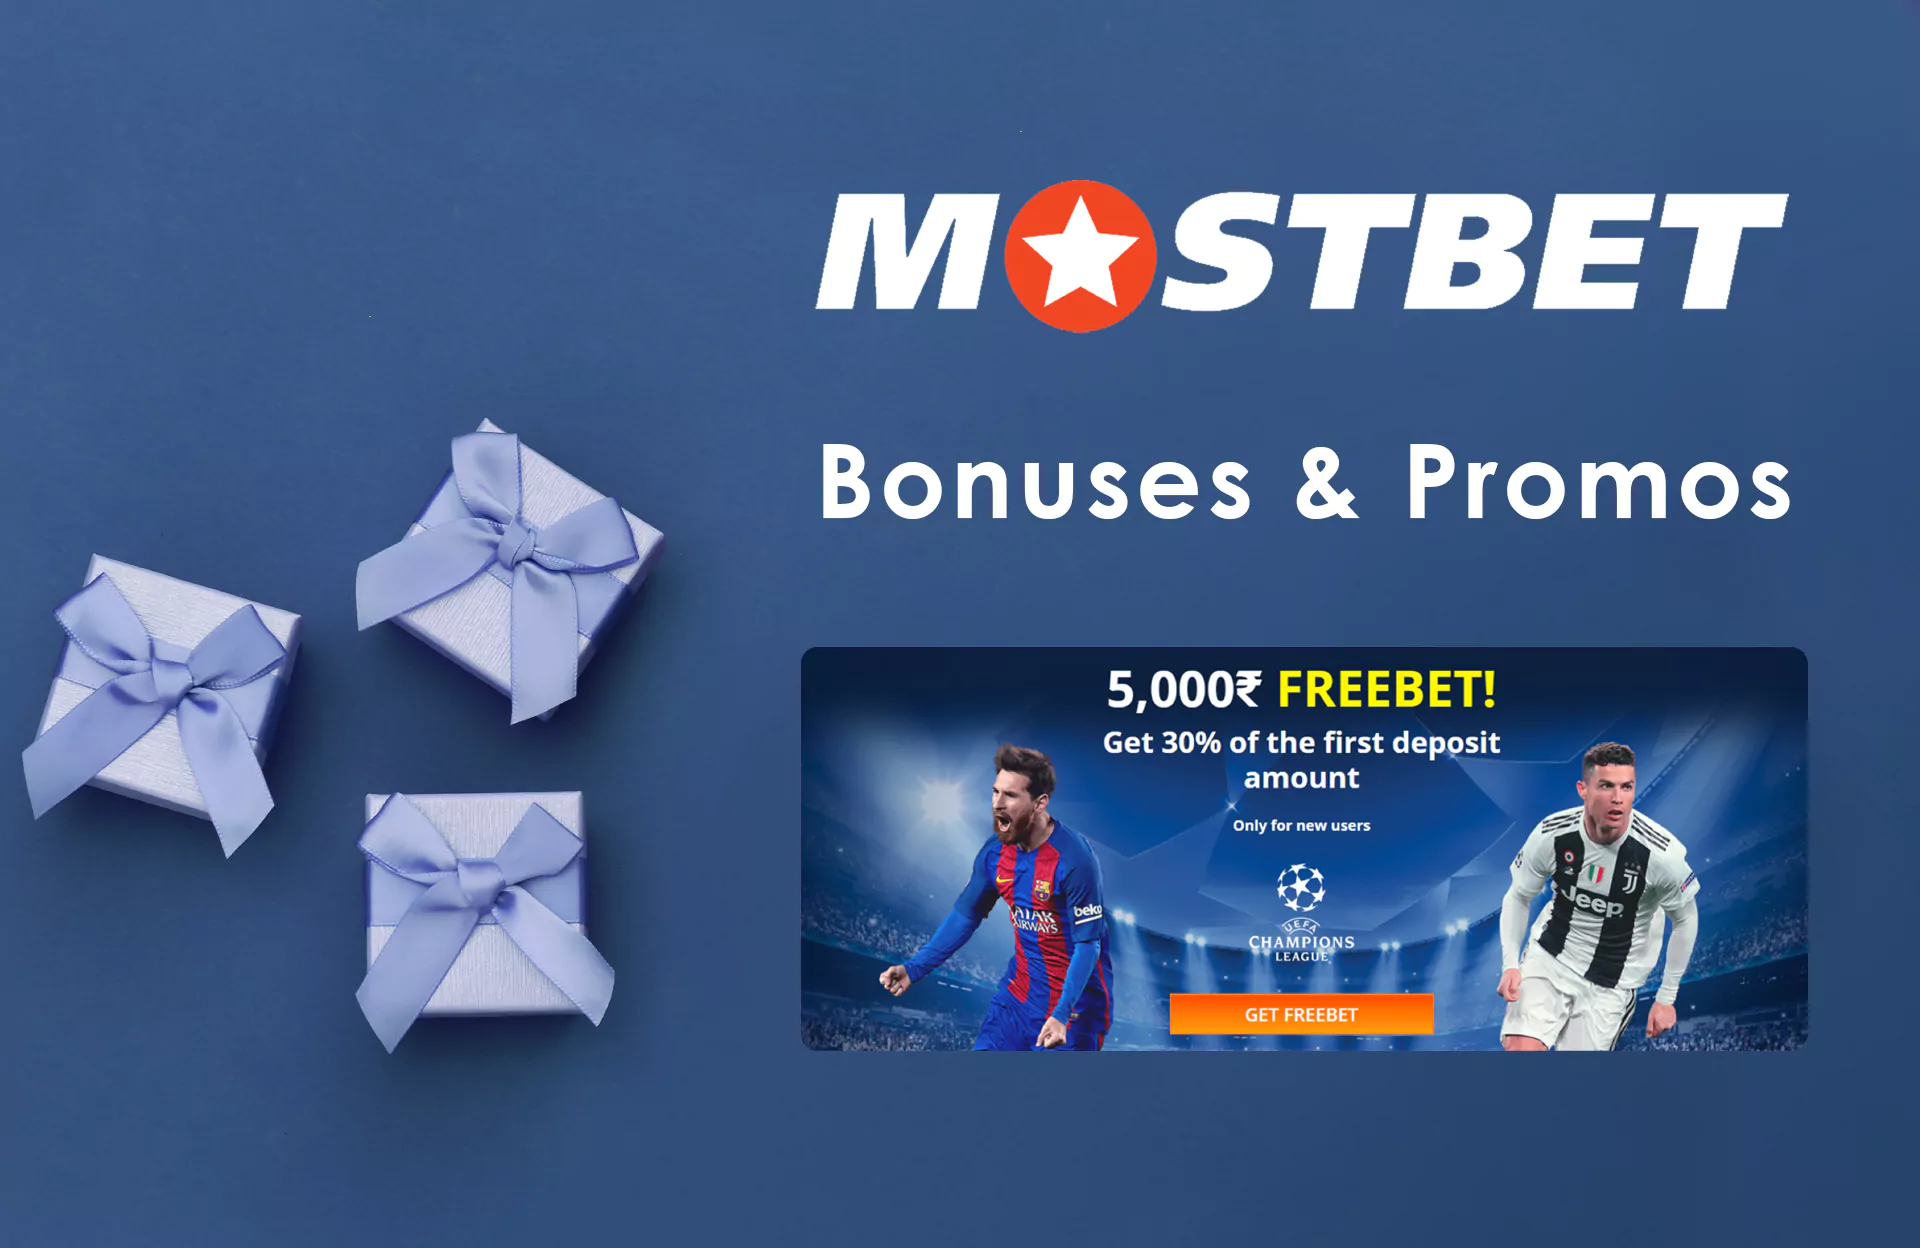 Mostbet provides plenty of bonuses and promos for its users.